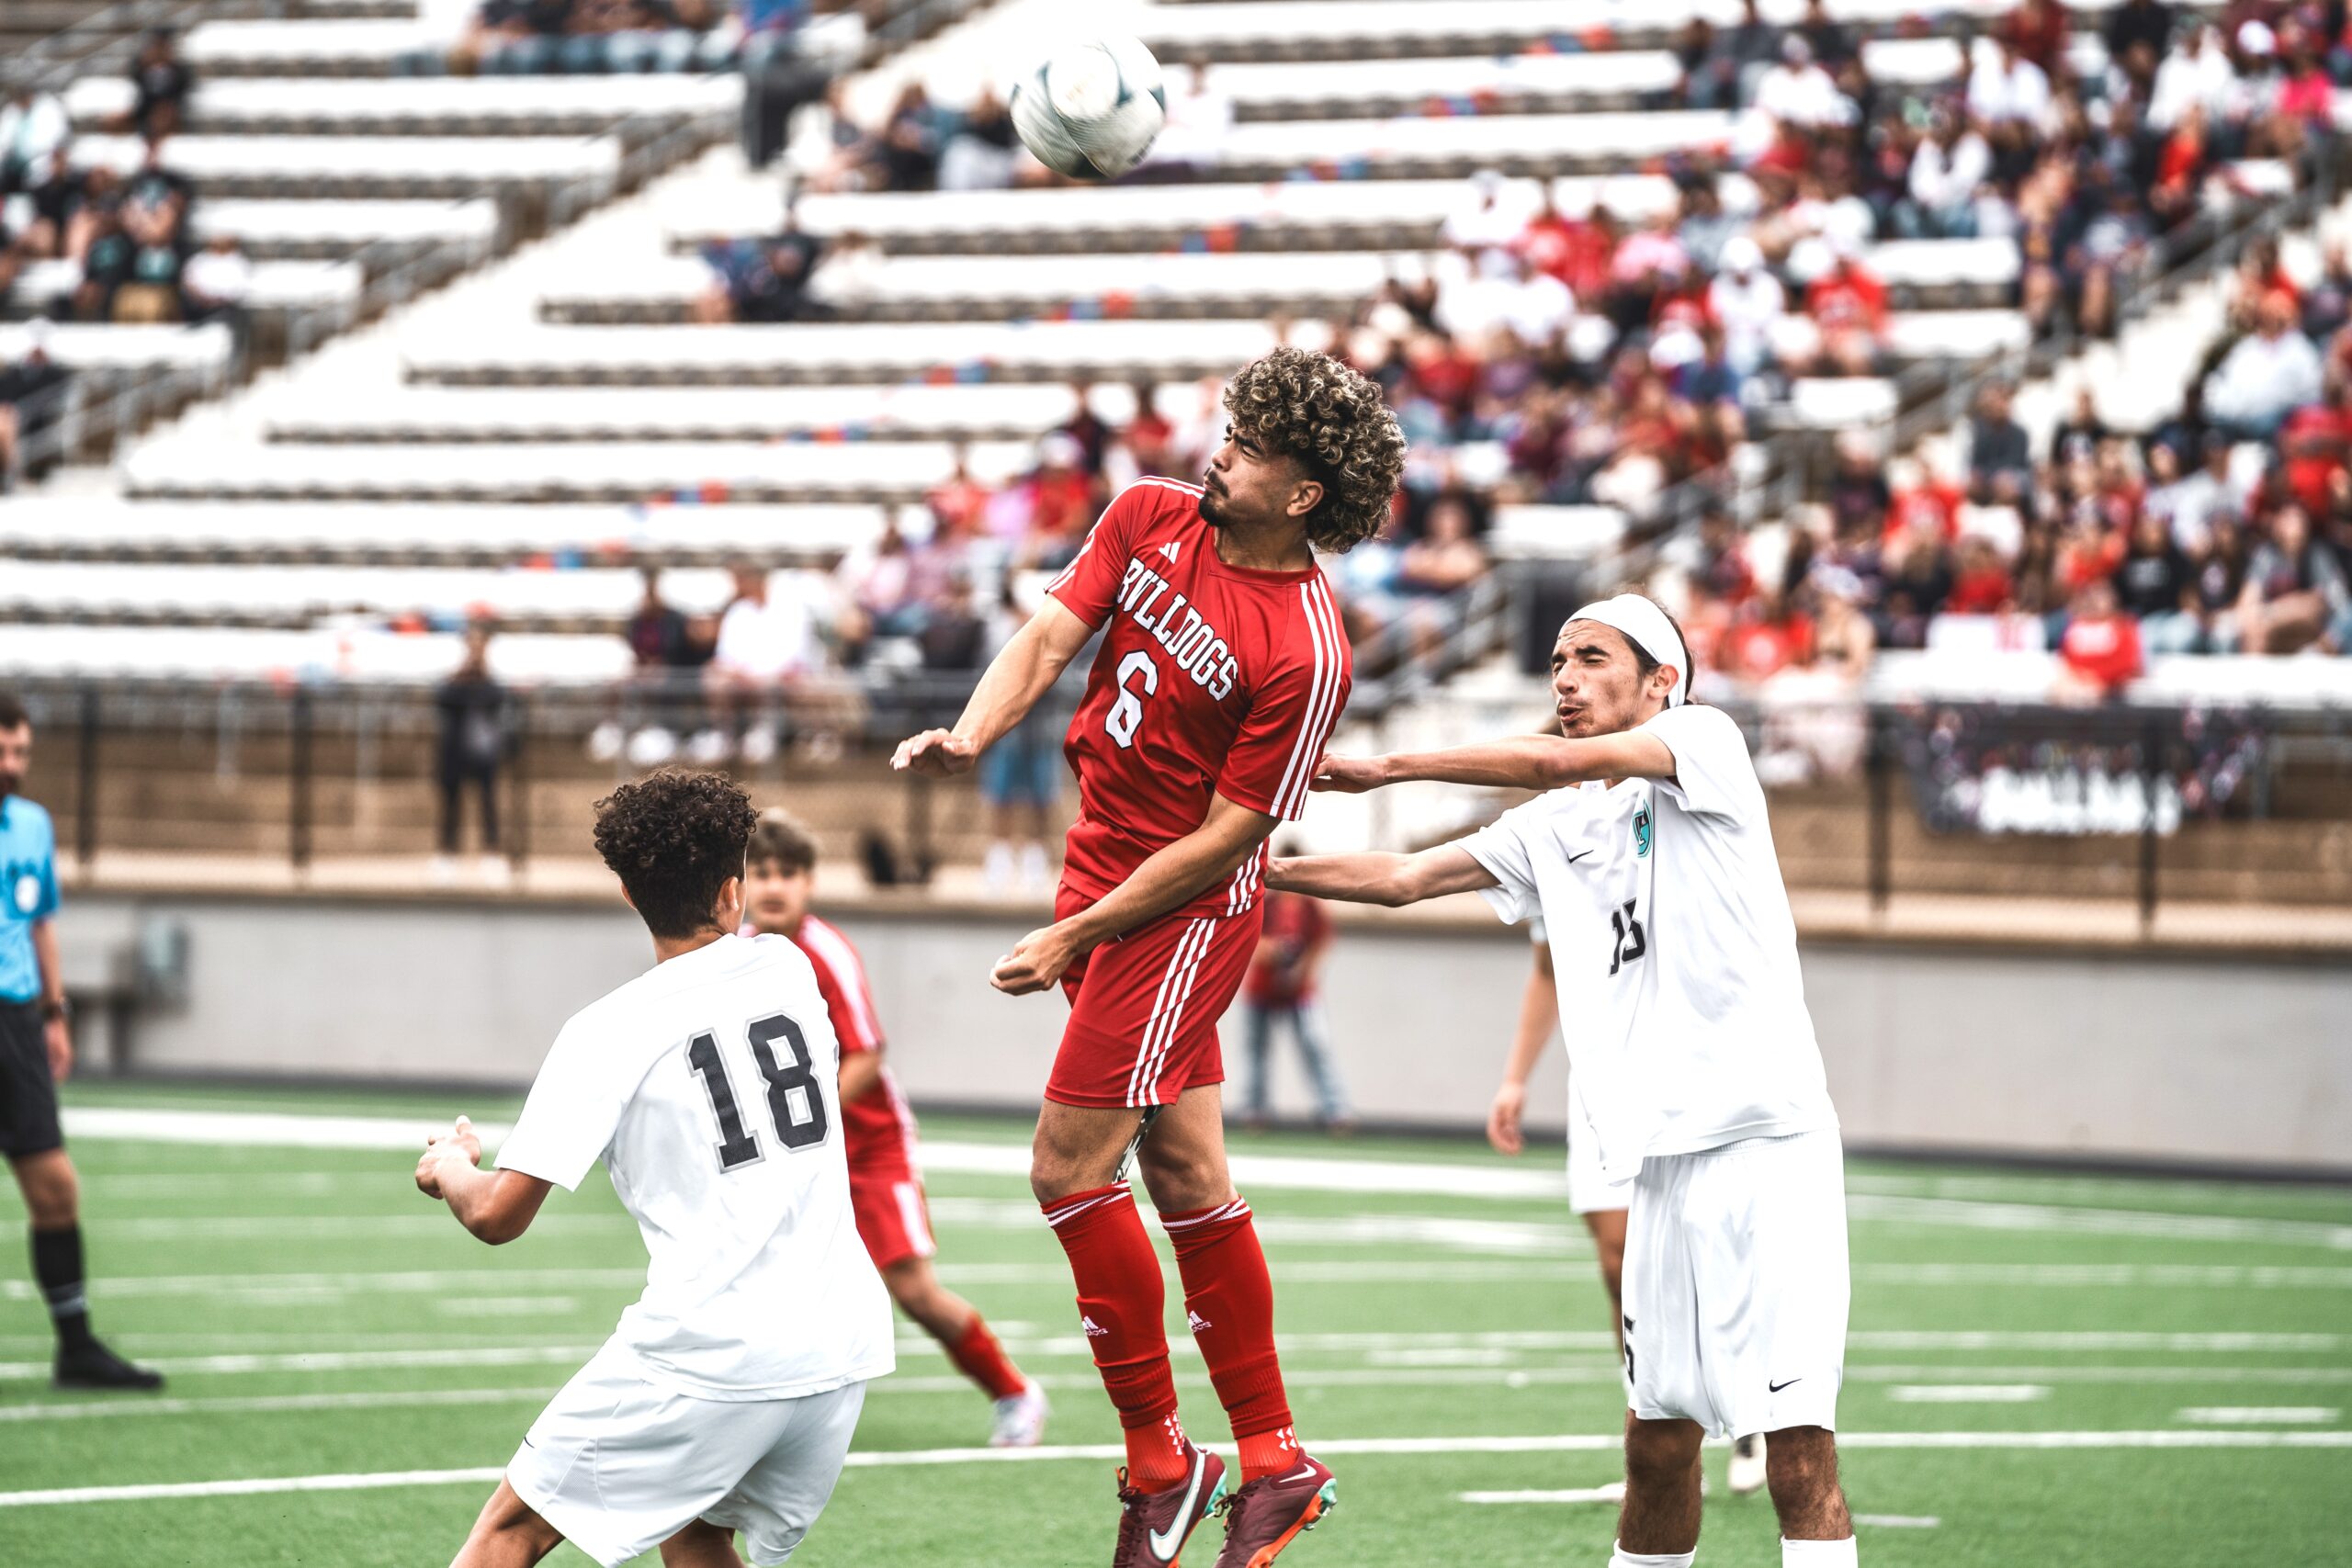 Kilgore's Leo Yzaguirre (center) executes a header in a recent playoff game. Yzaguirre and teammates Chris Martinez, Adan Reyes, Diego Rojas, coach Hector Peralez, and three players from Sabine -- Jesus Duran, Luke Kirkindoll, and Francisco Perez -- have all been honored with the release of this year's Texas Association of Soccer Coaches' Class 4A All-State and All-Region teams. (Photo by ALEX NABOR - ETBLITZ.COM)